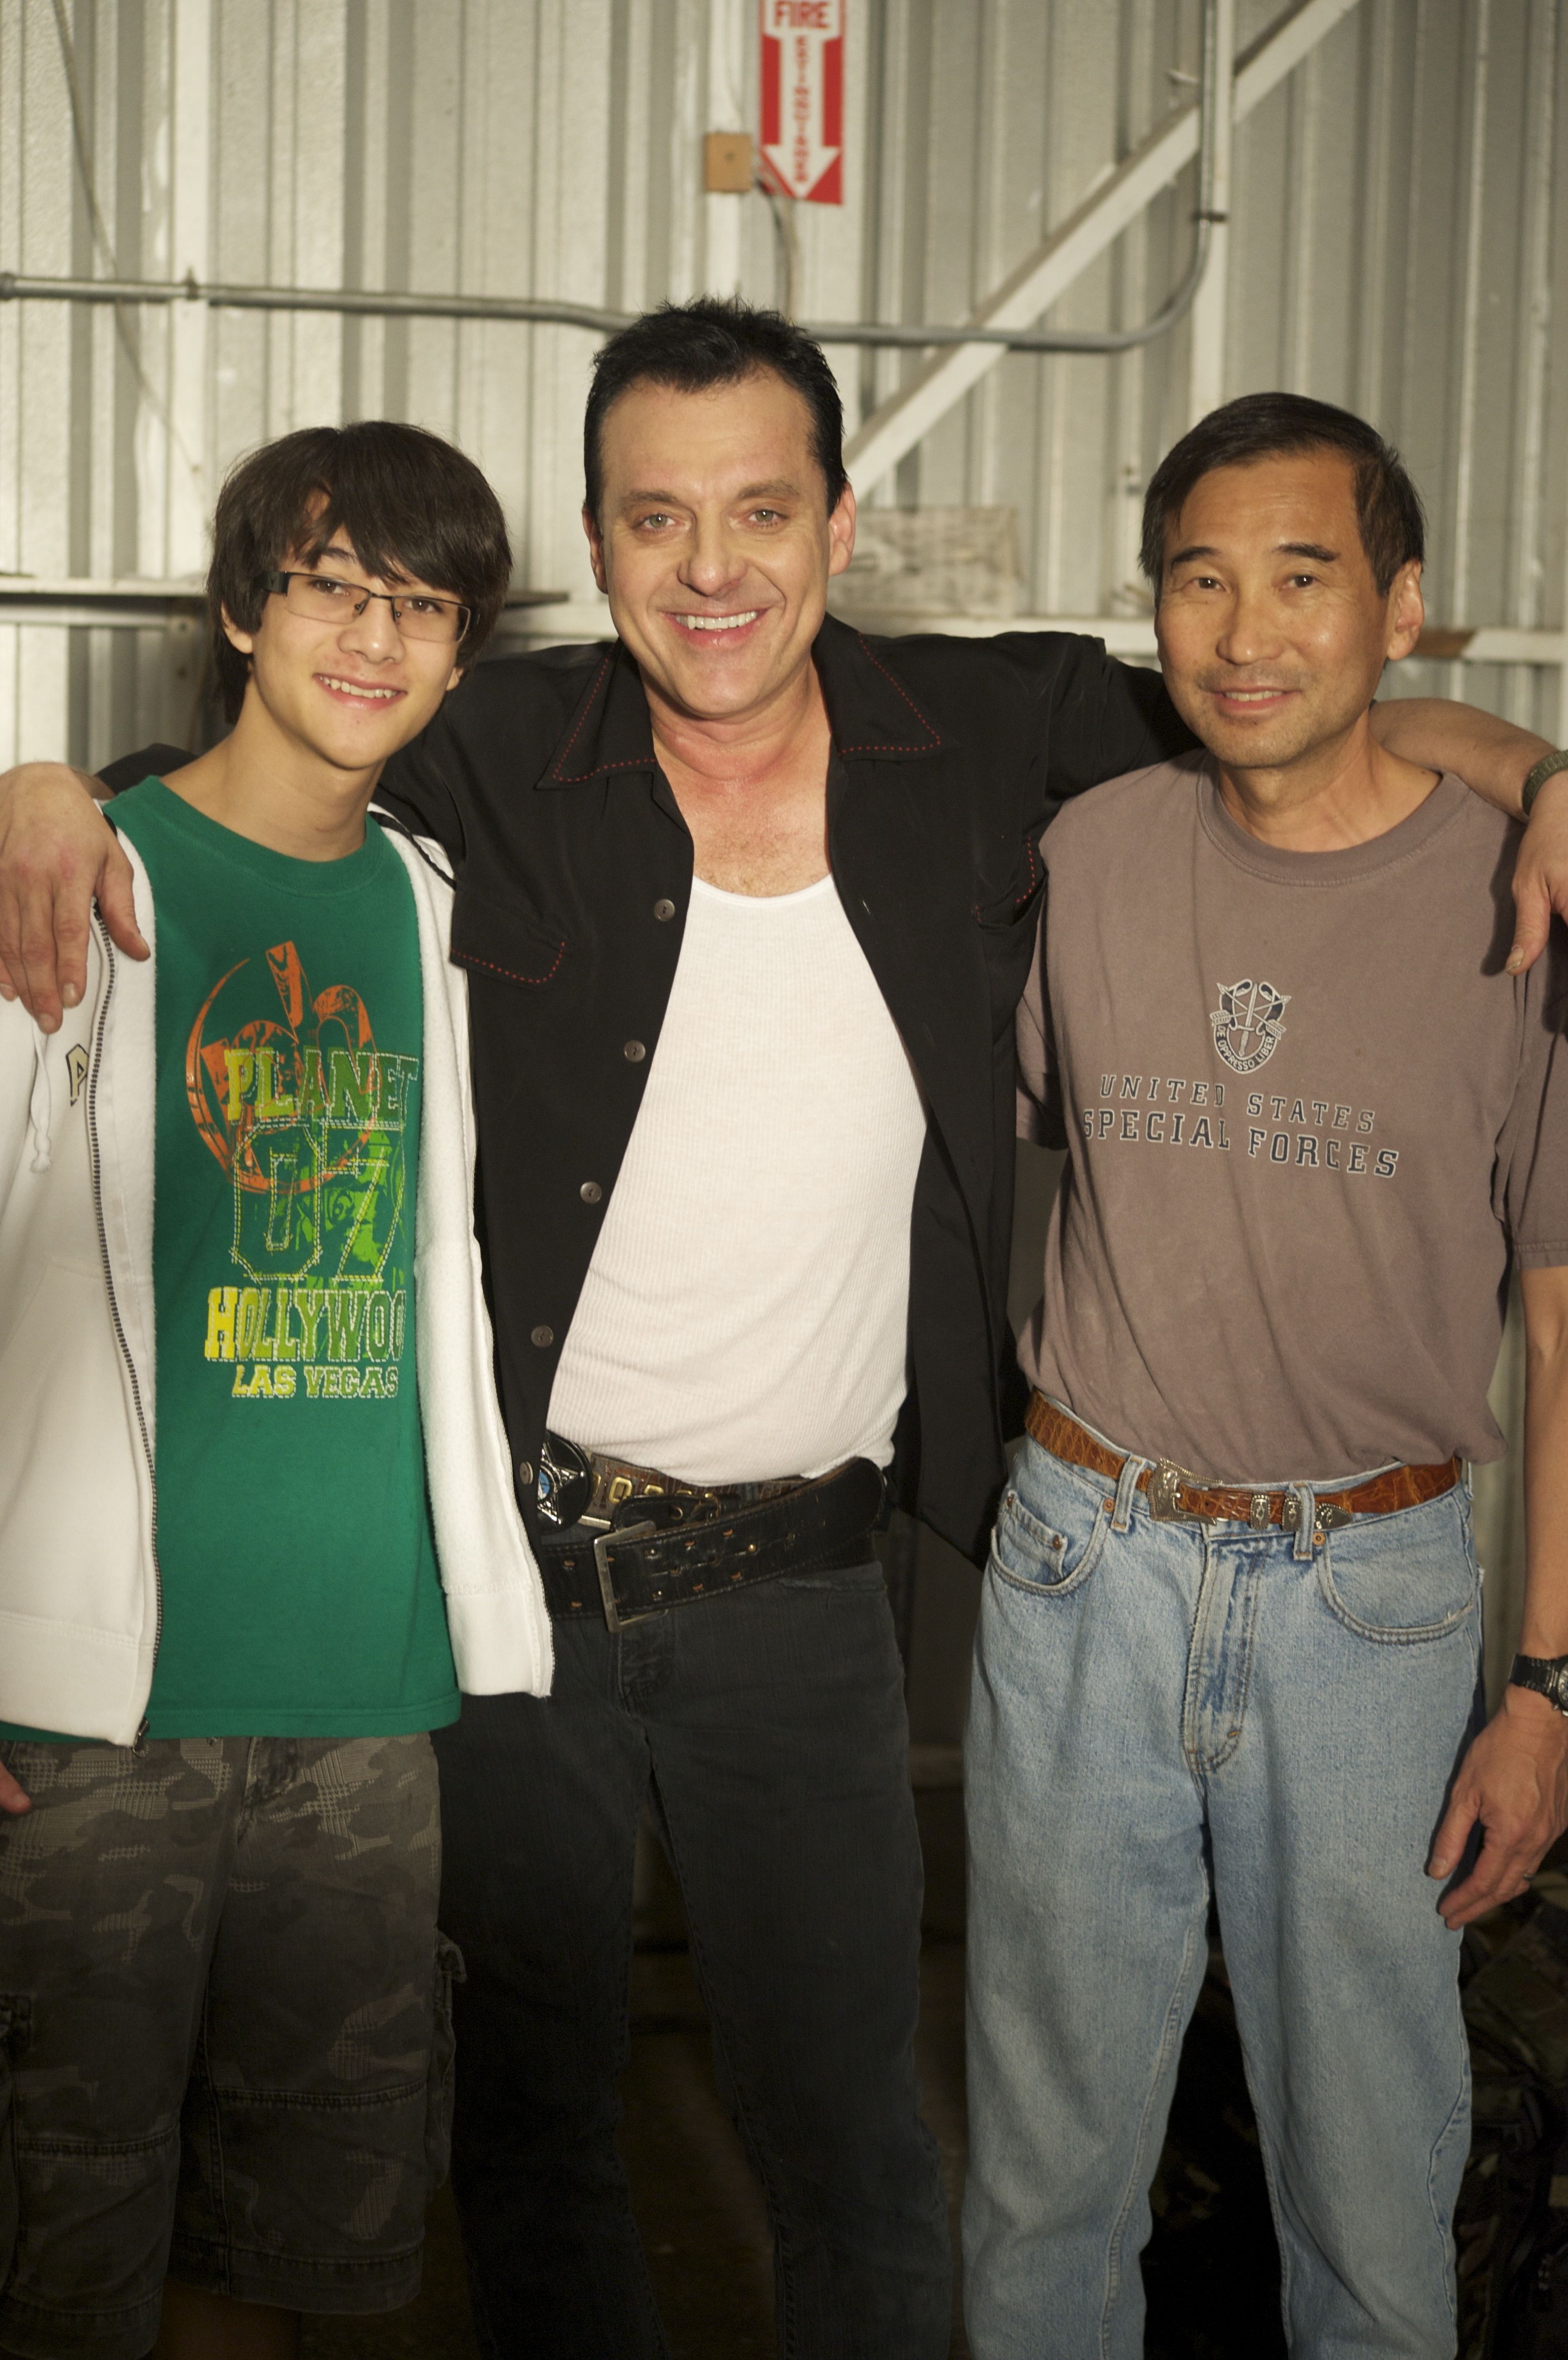 TJ Lui, Tom Sizemore, and Henry Lui on film location for Through the Eye.